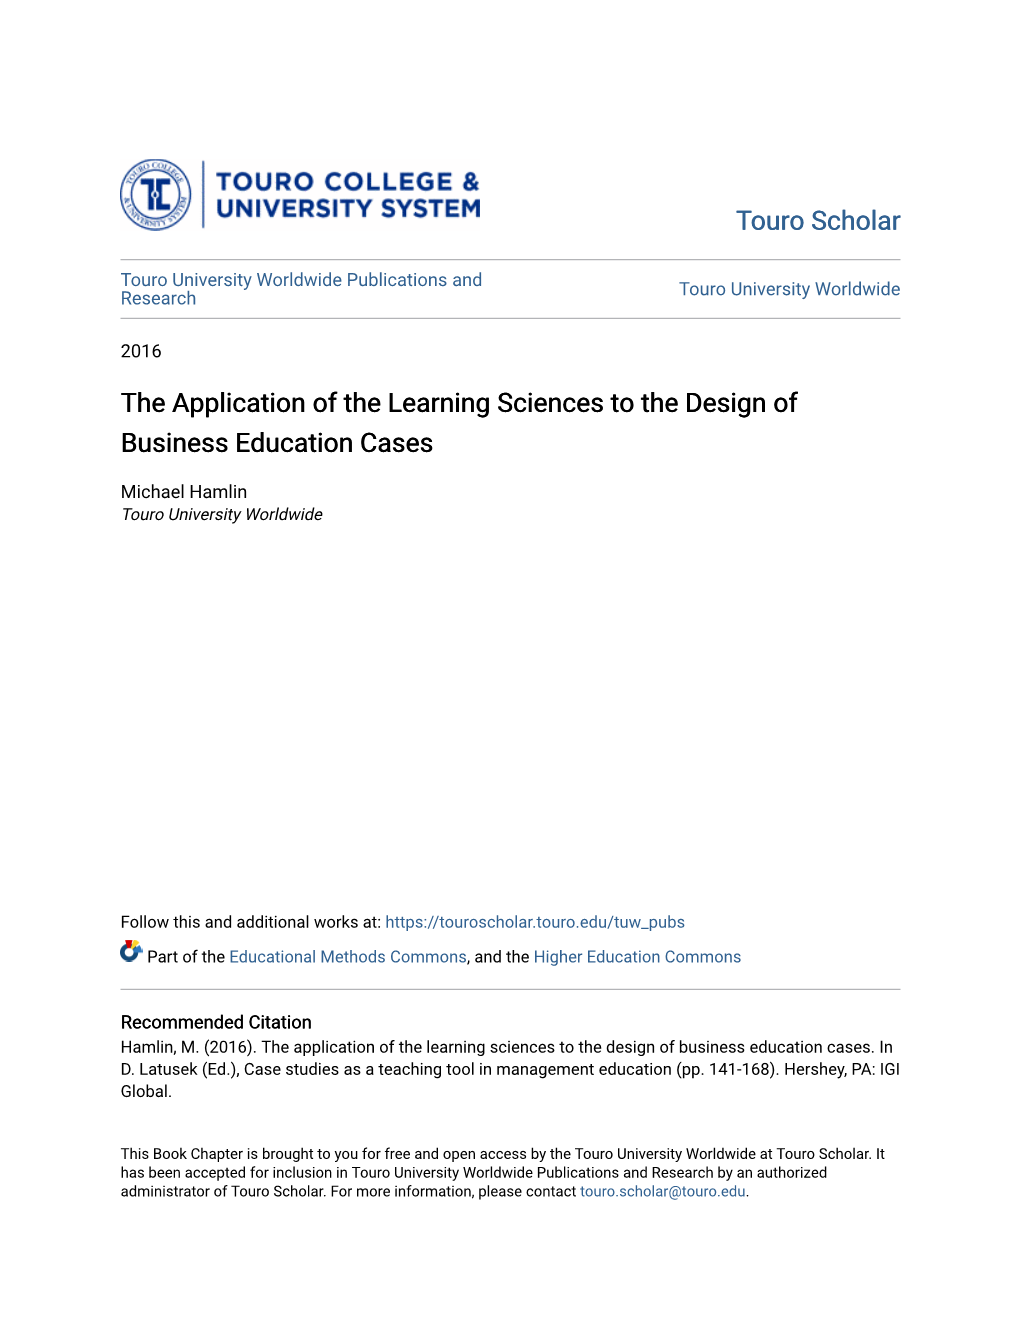 The Application of the Learning Sciences to the Design of Business Education Cases